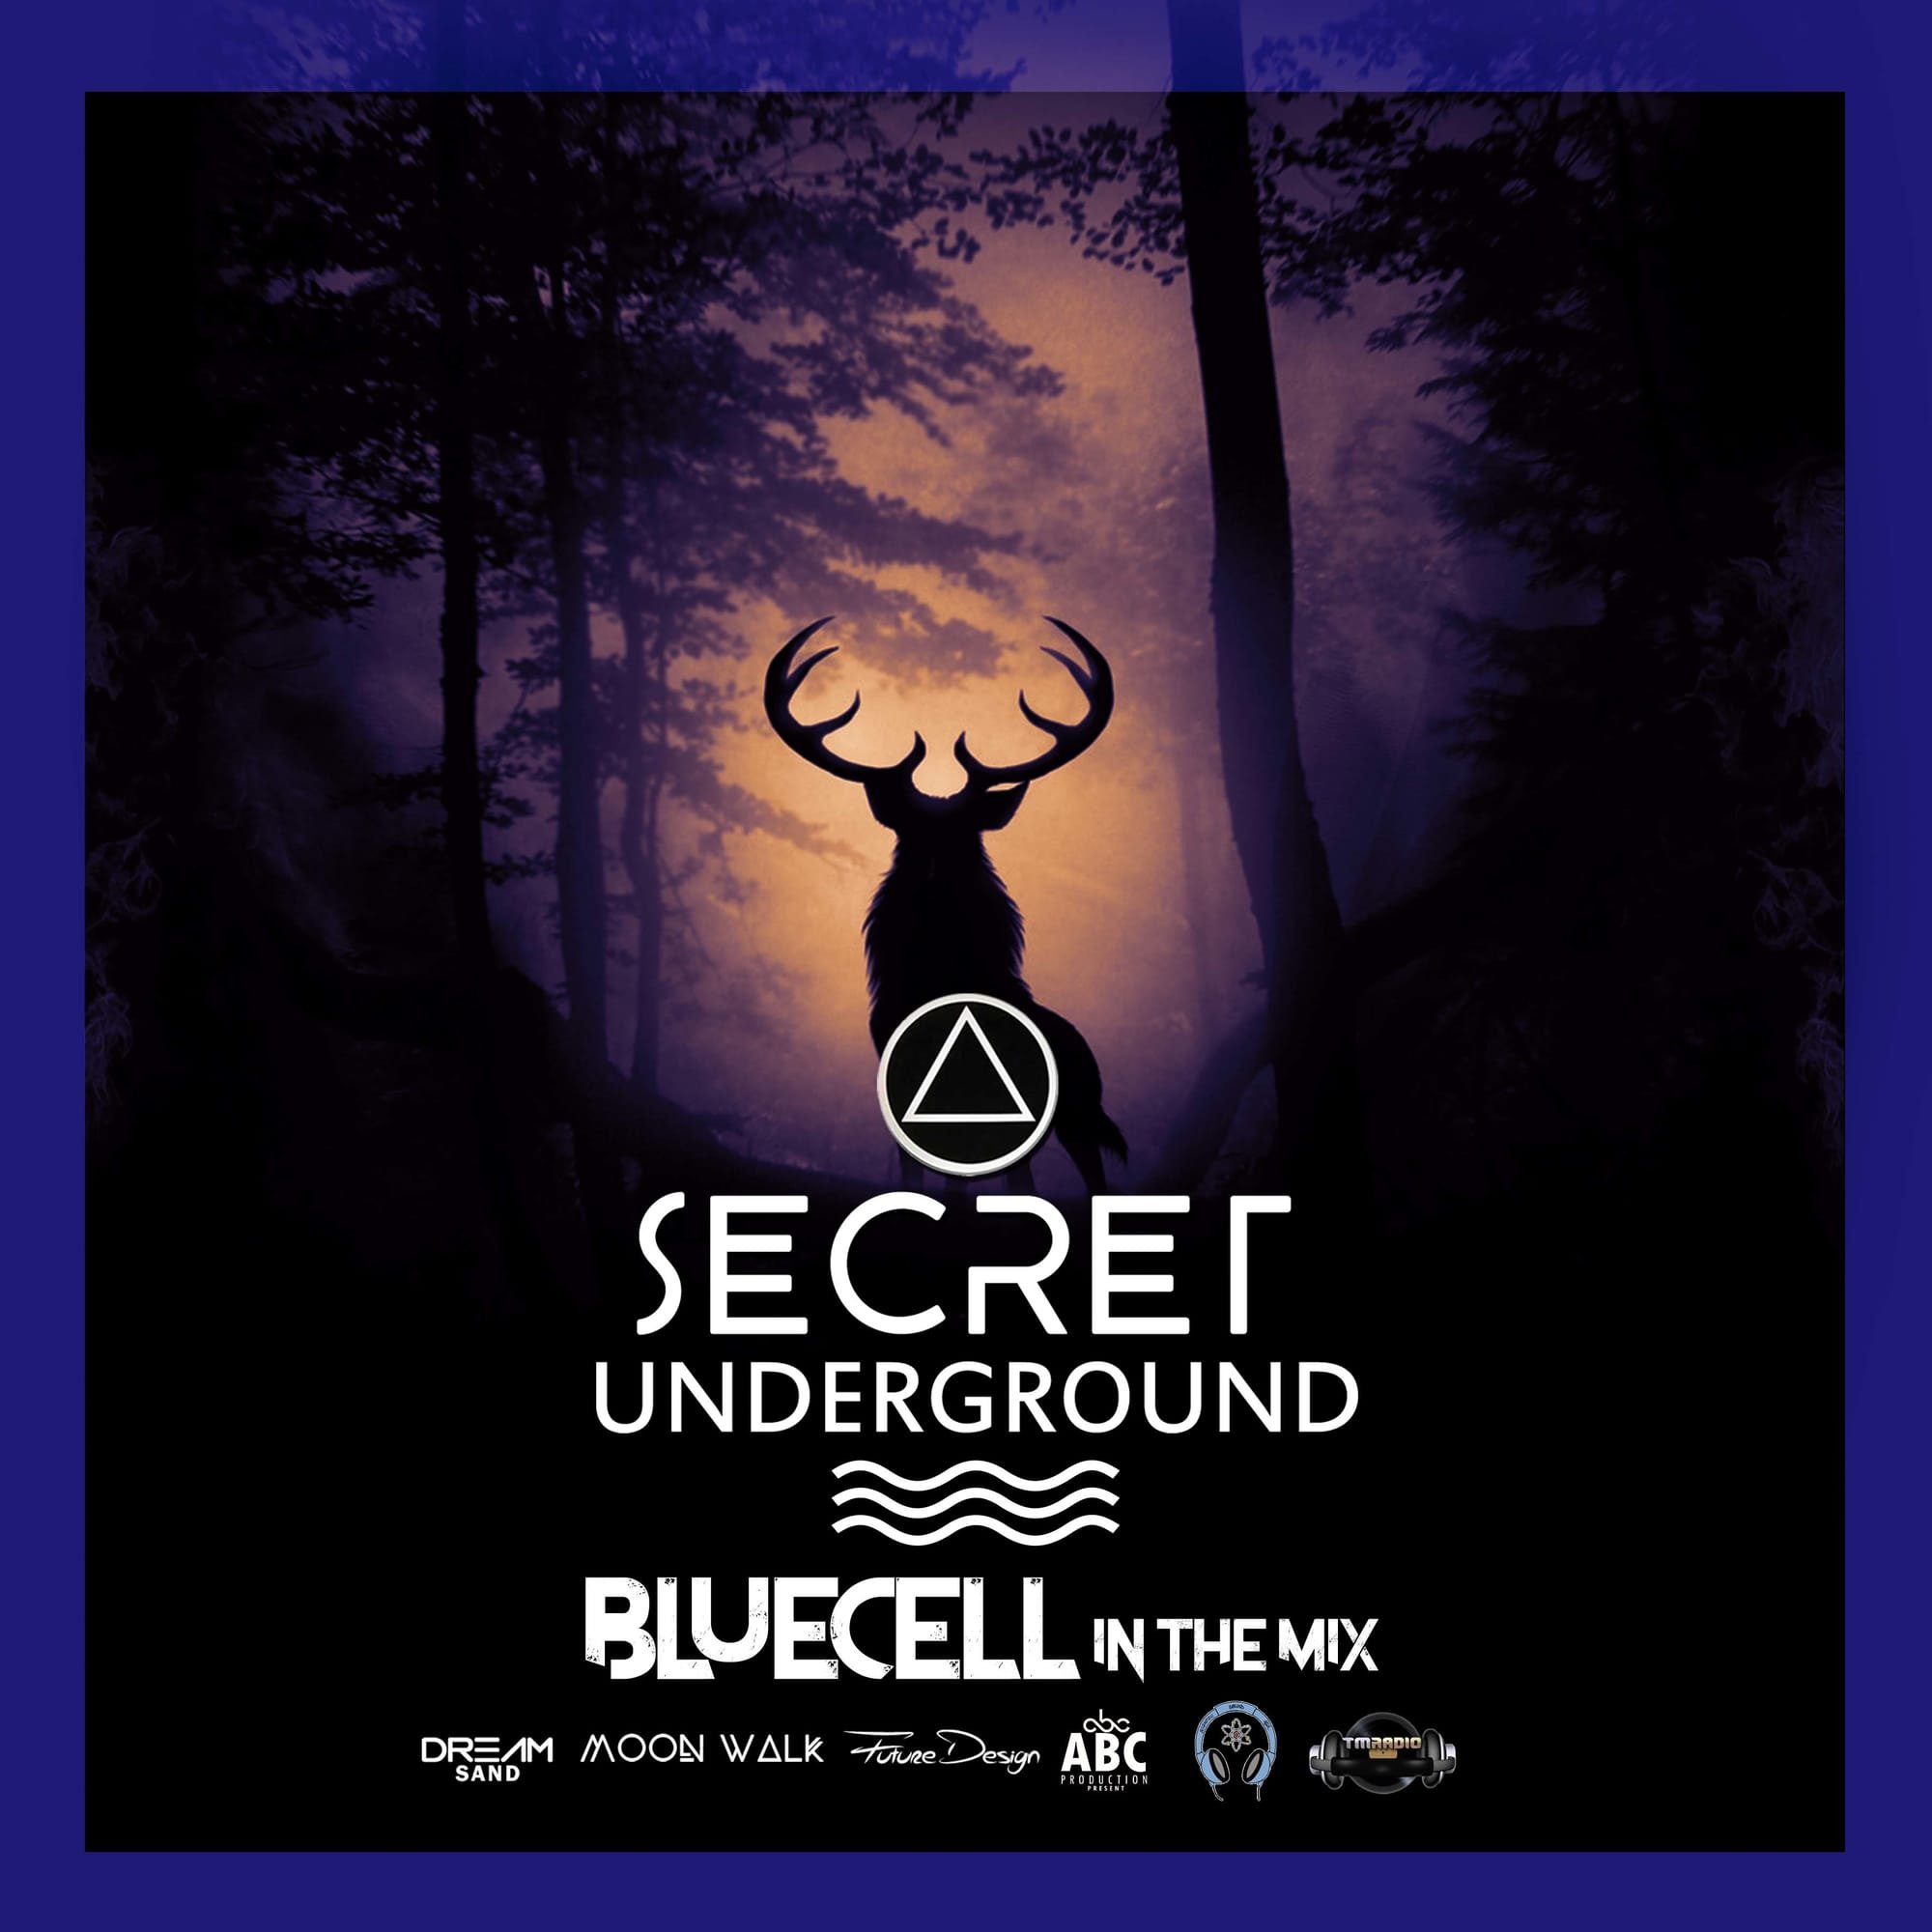 Secret Underground announce playlist and guest DJ Duo Blue Cell.